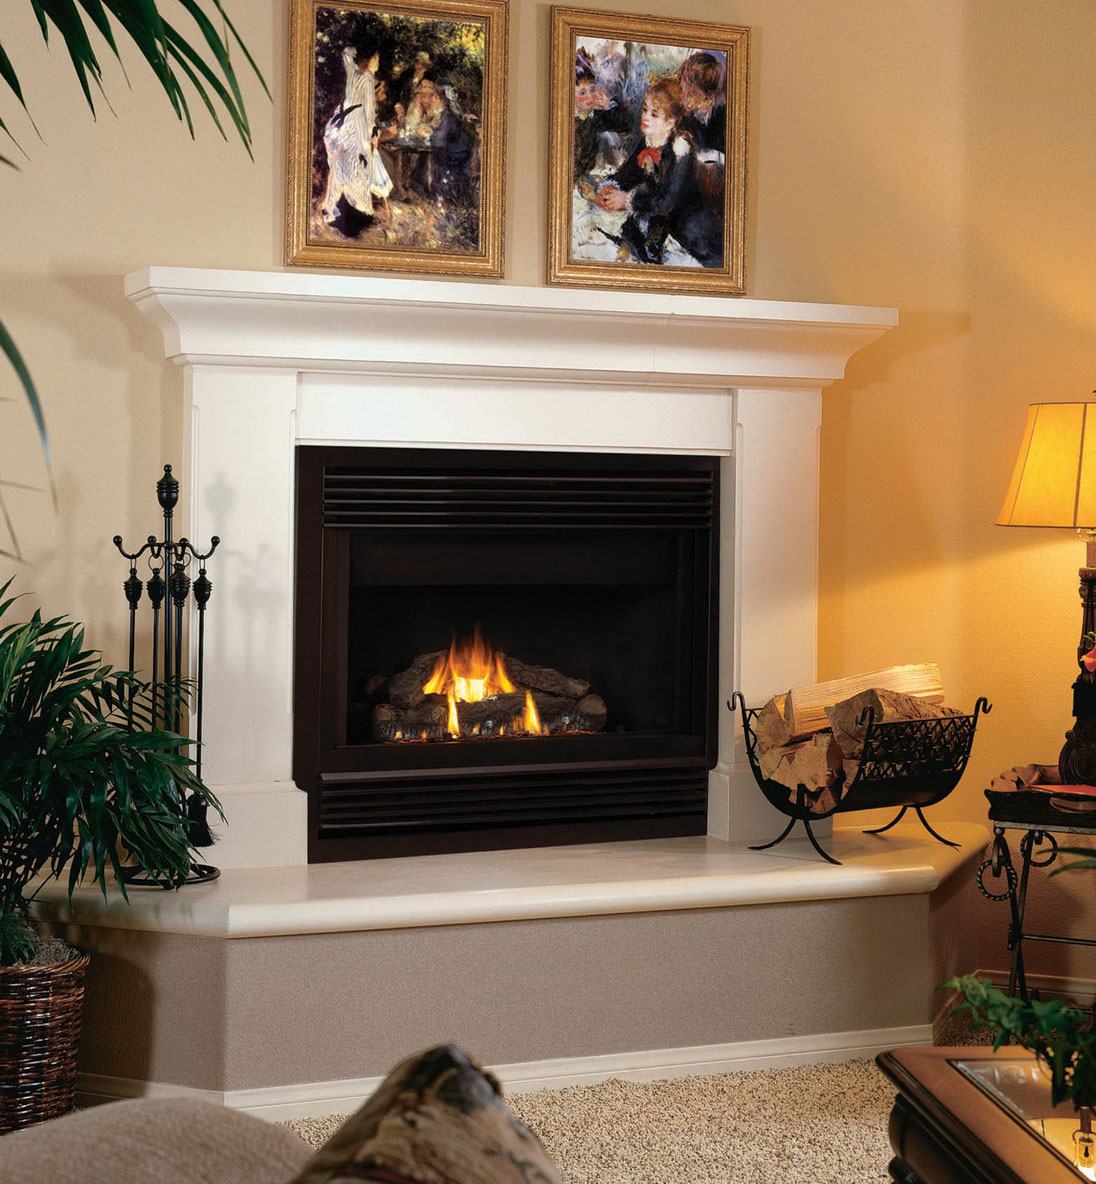 Unique Fireplace Mantel Designs And, How To Design A Fireplace Surround